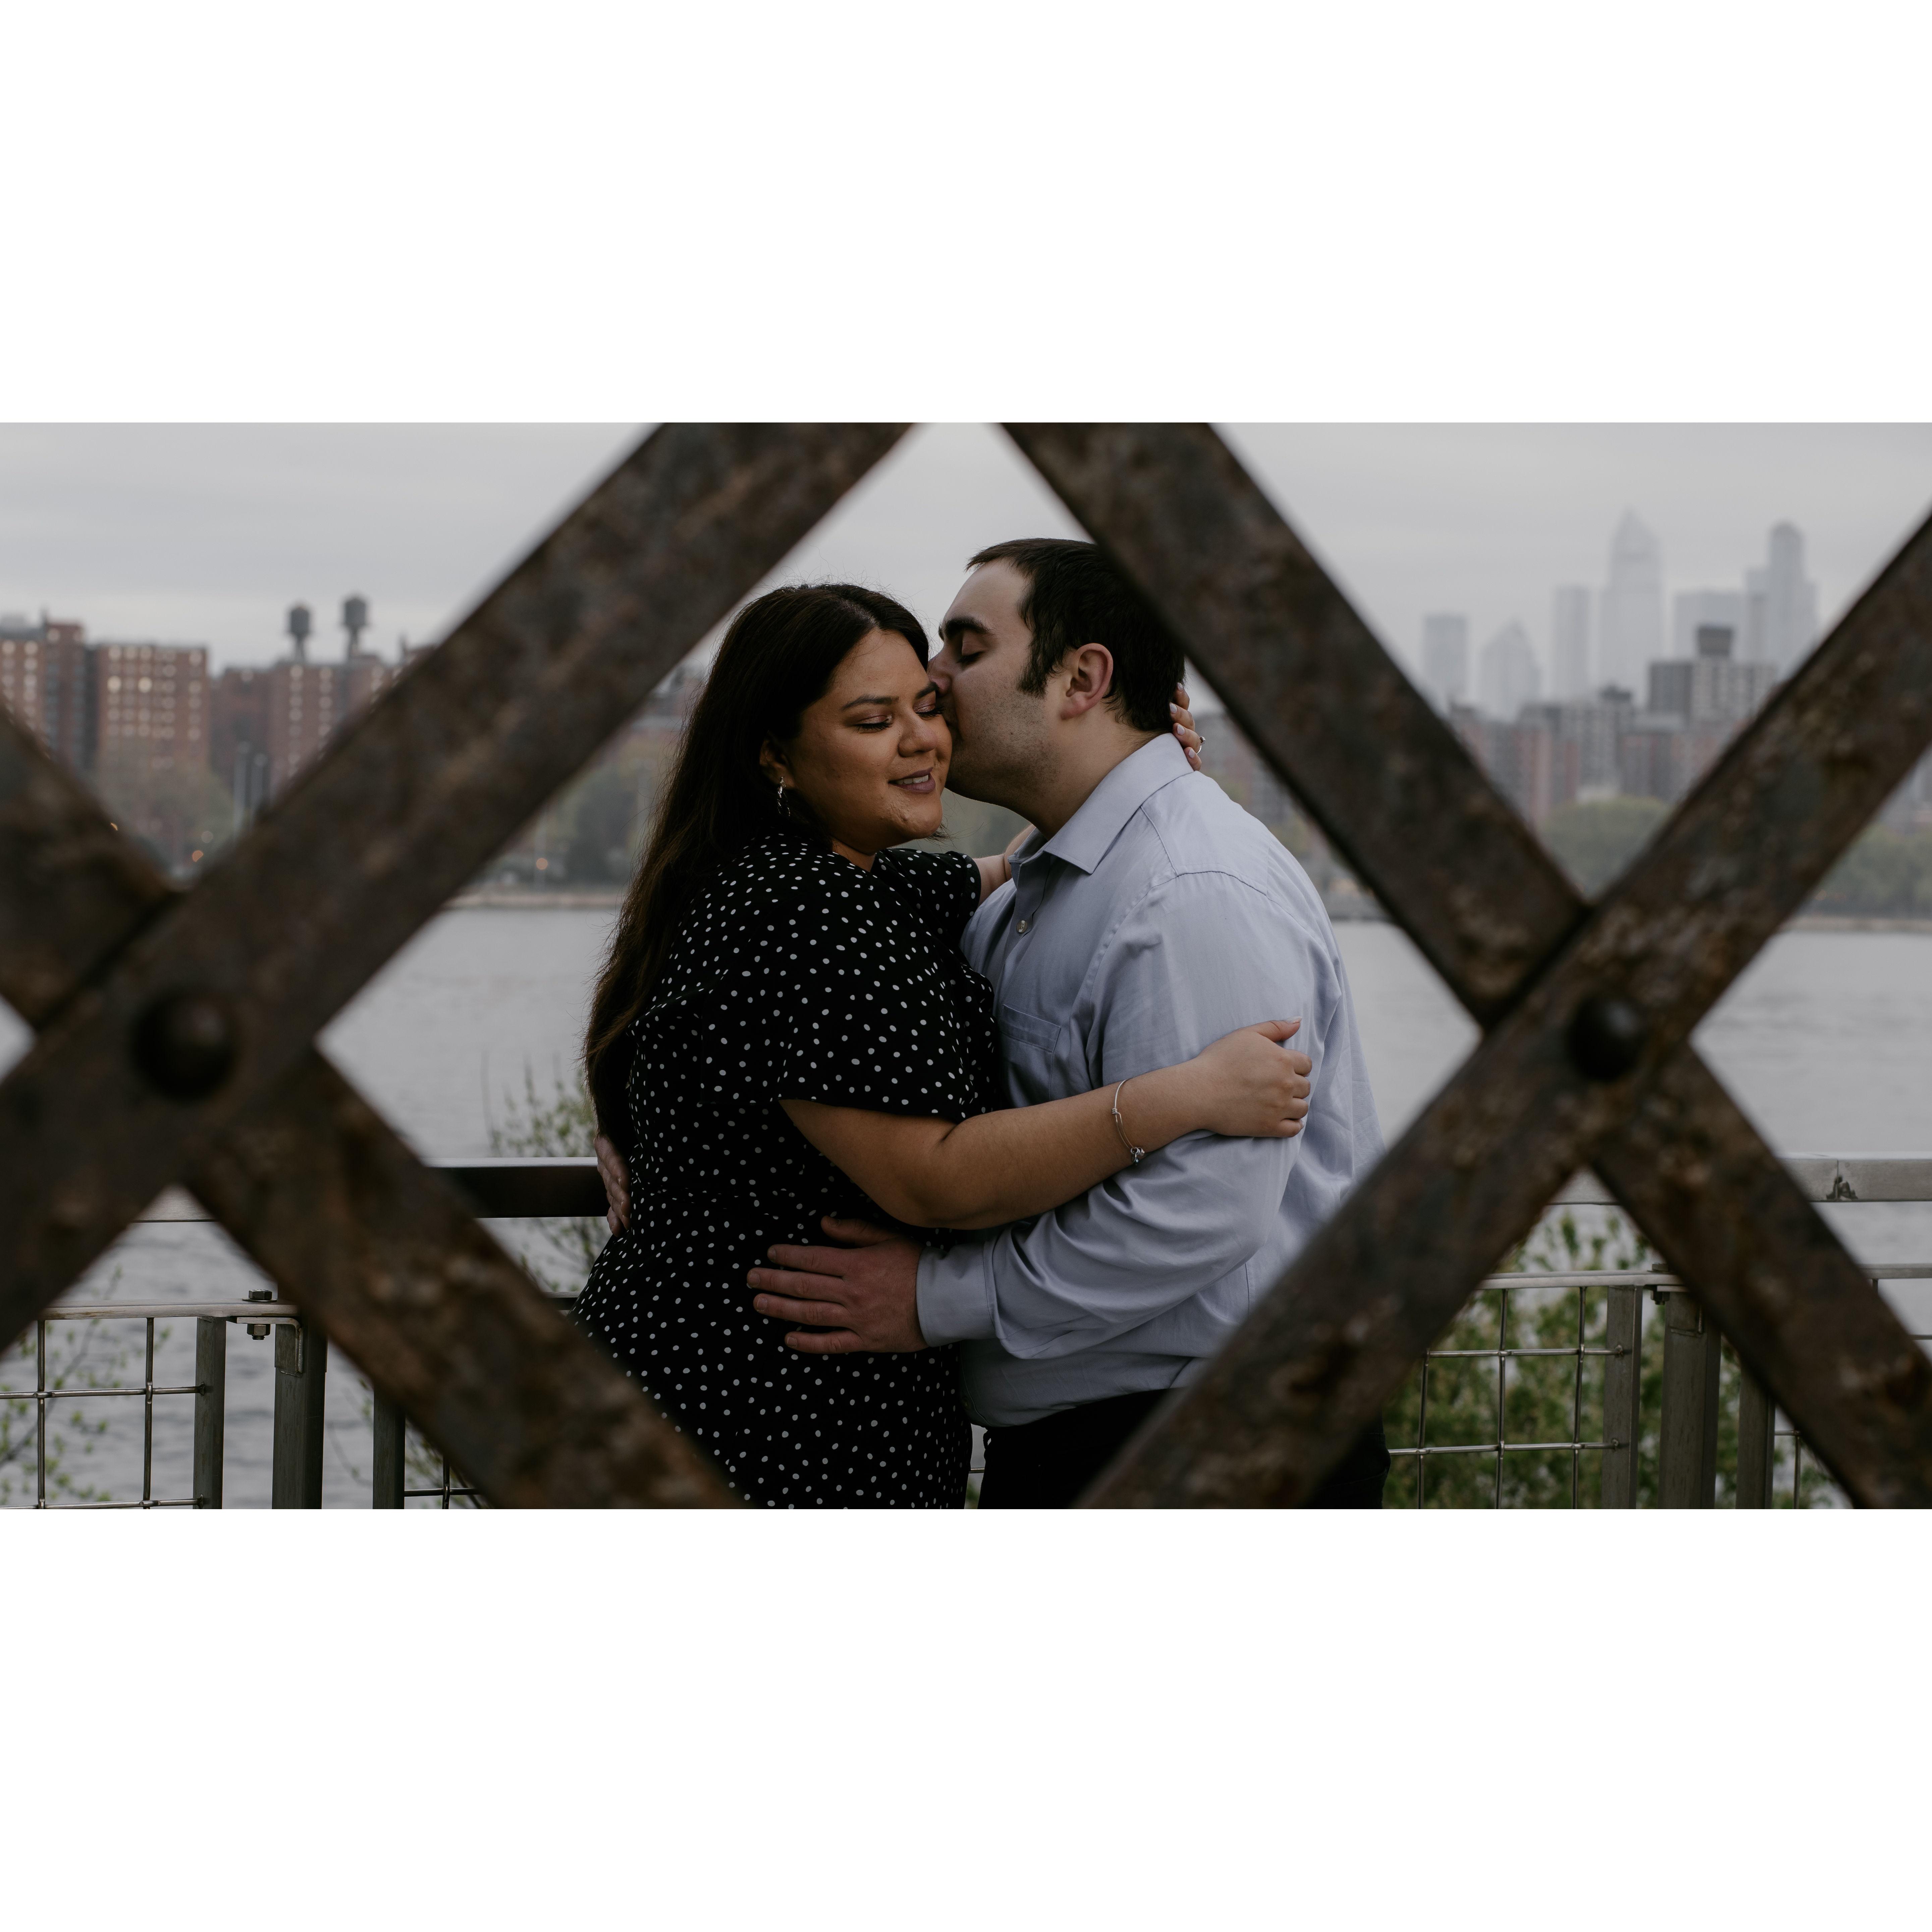 A few of our favorites from our engagement photoshoot